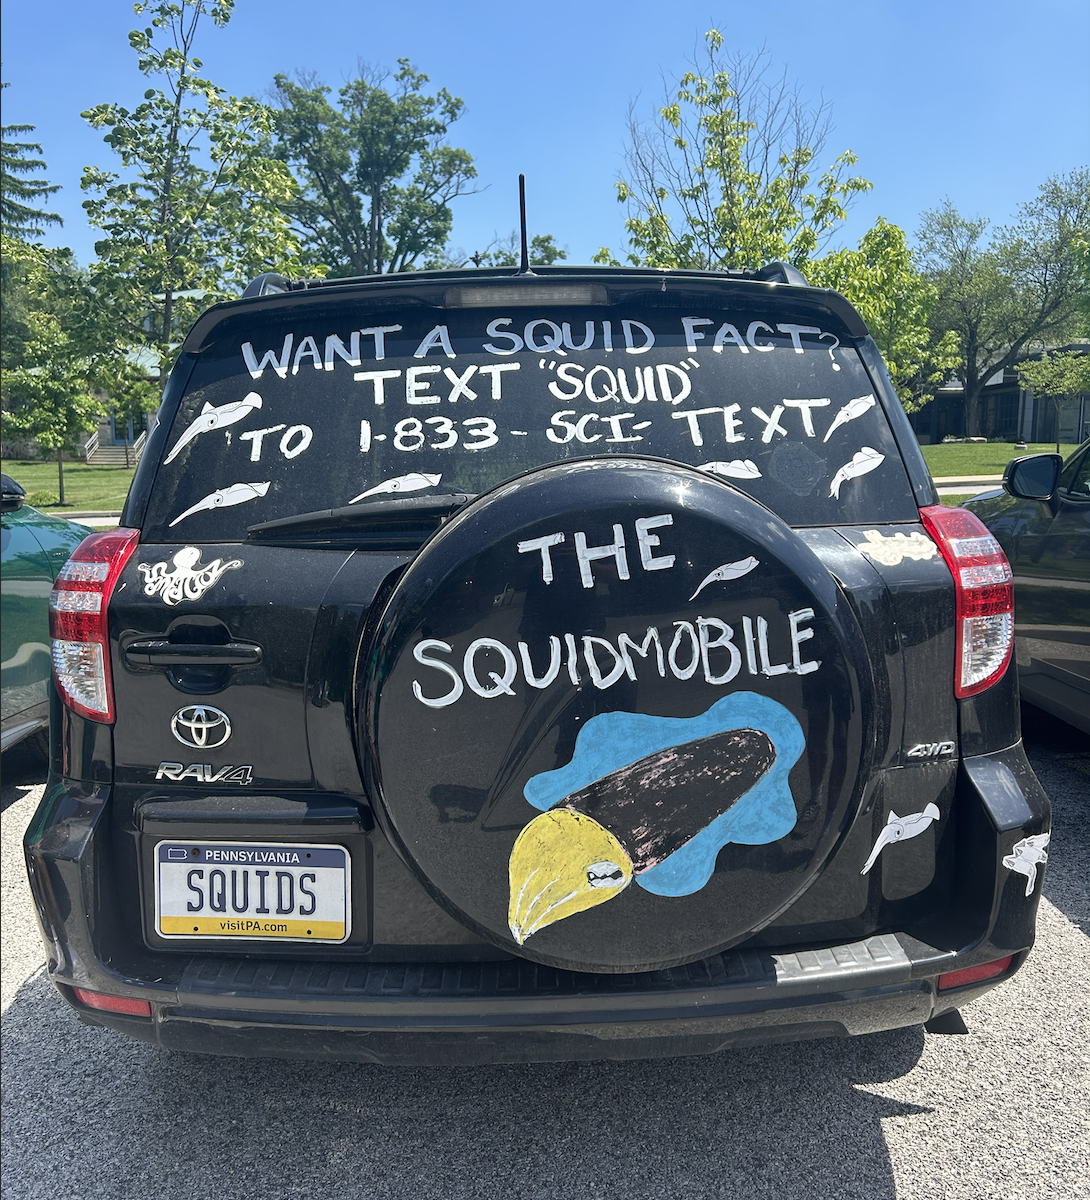 Have you seen the squid mobile?